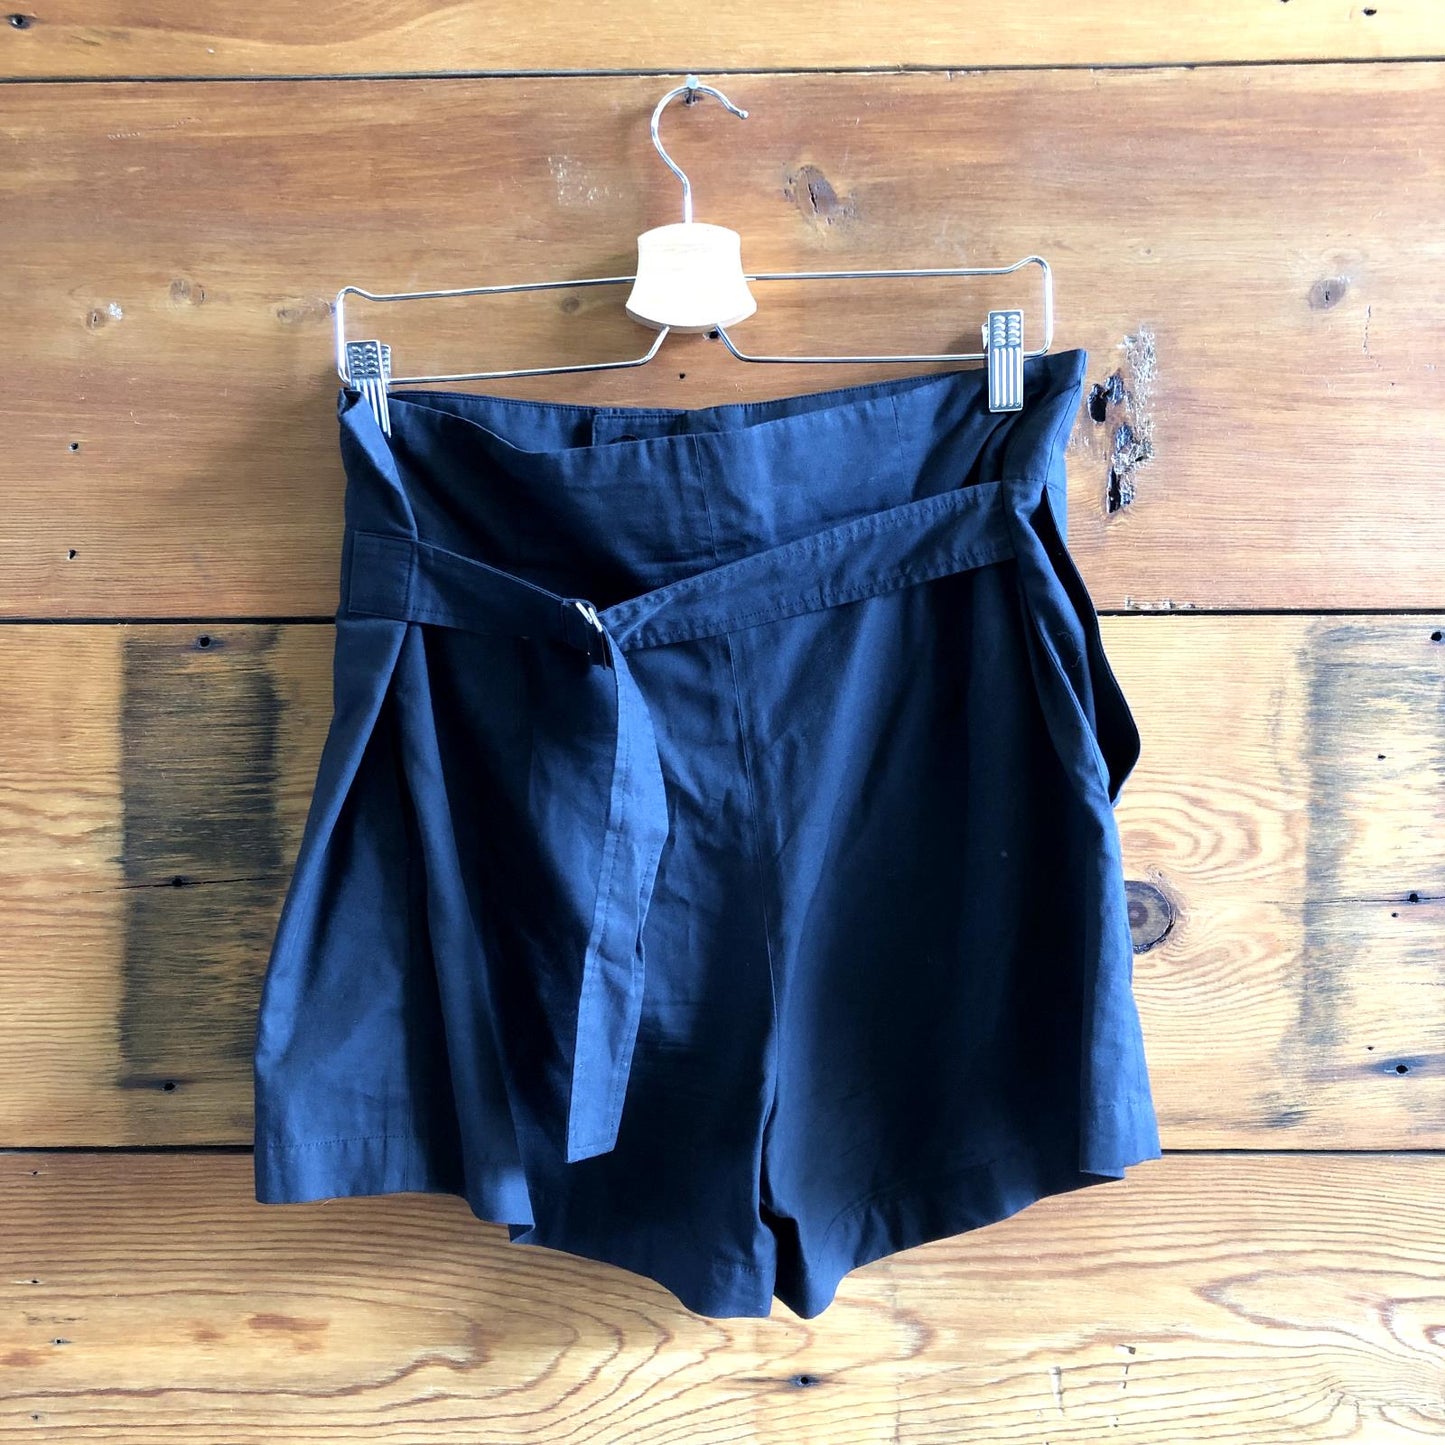 XS - Totokaelo Black Cotton High Waist Belted Womens Shorts 0226AT